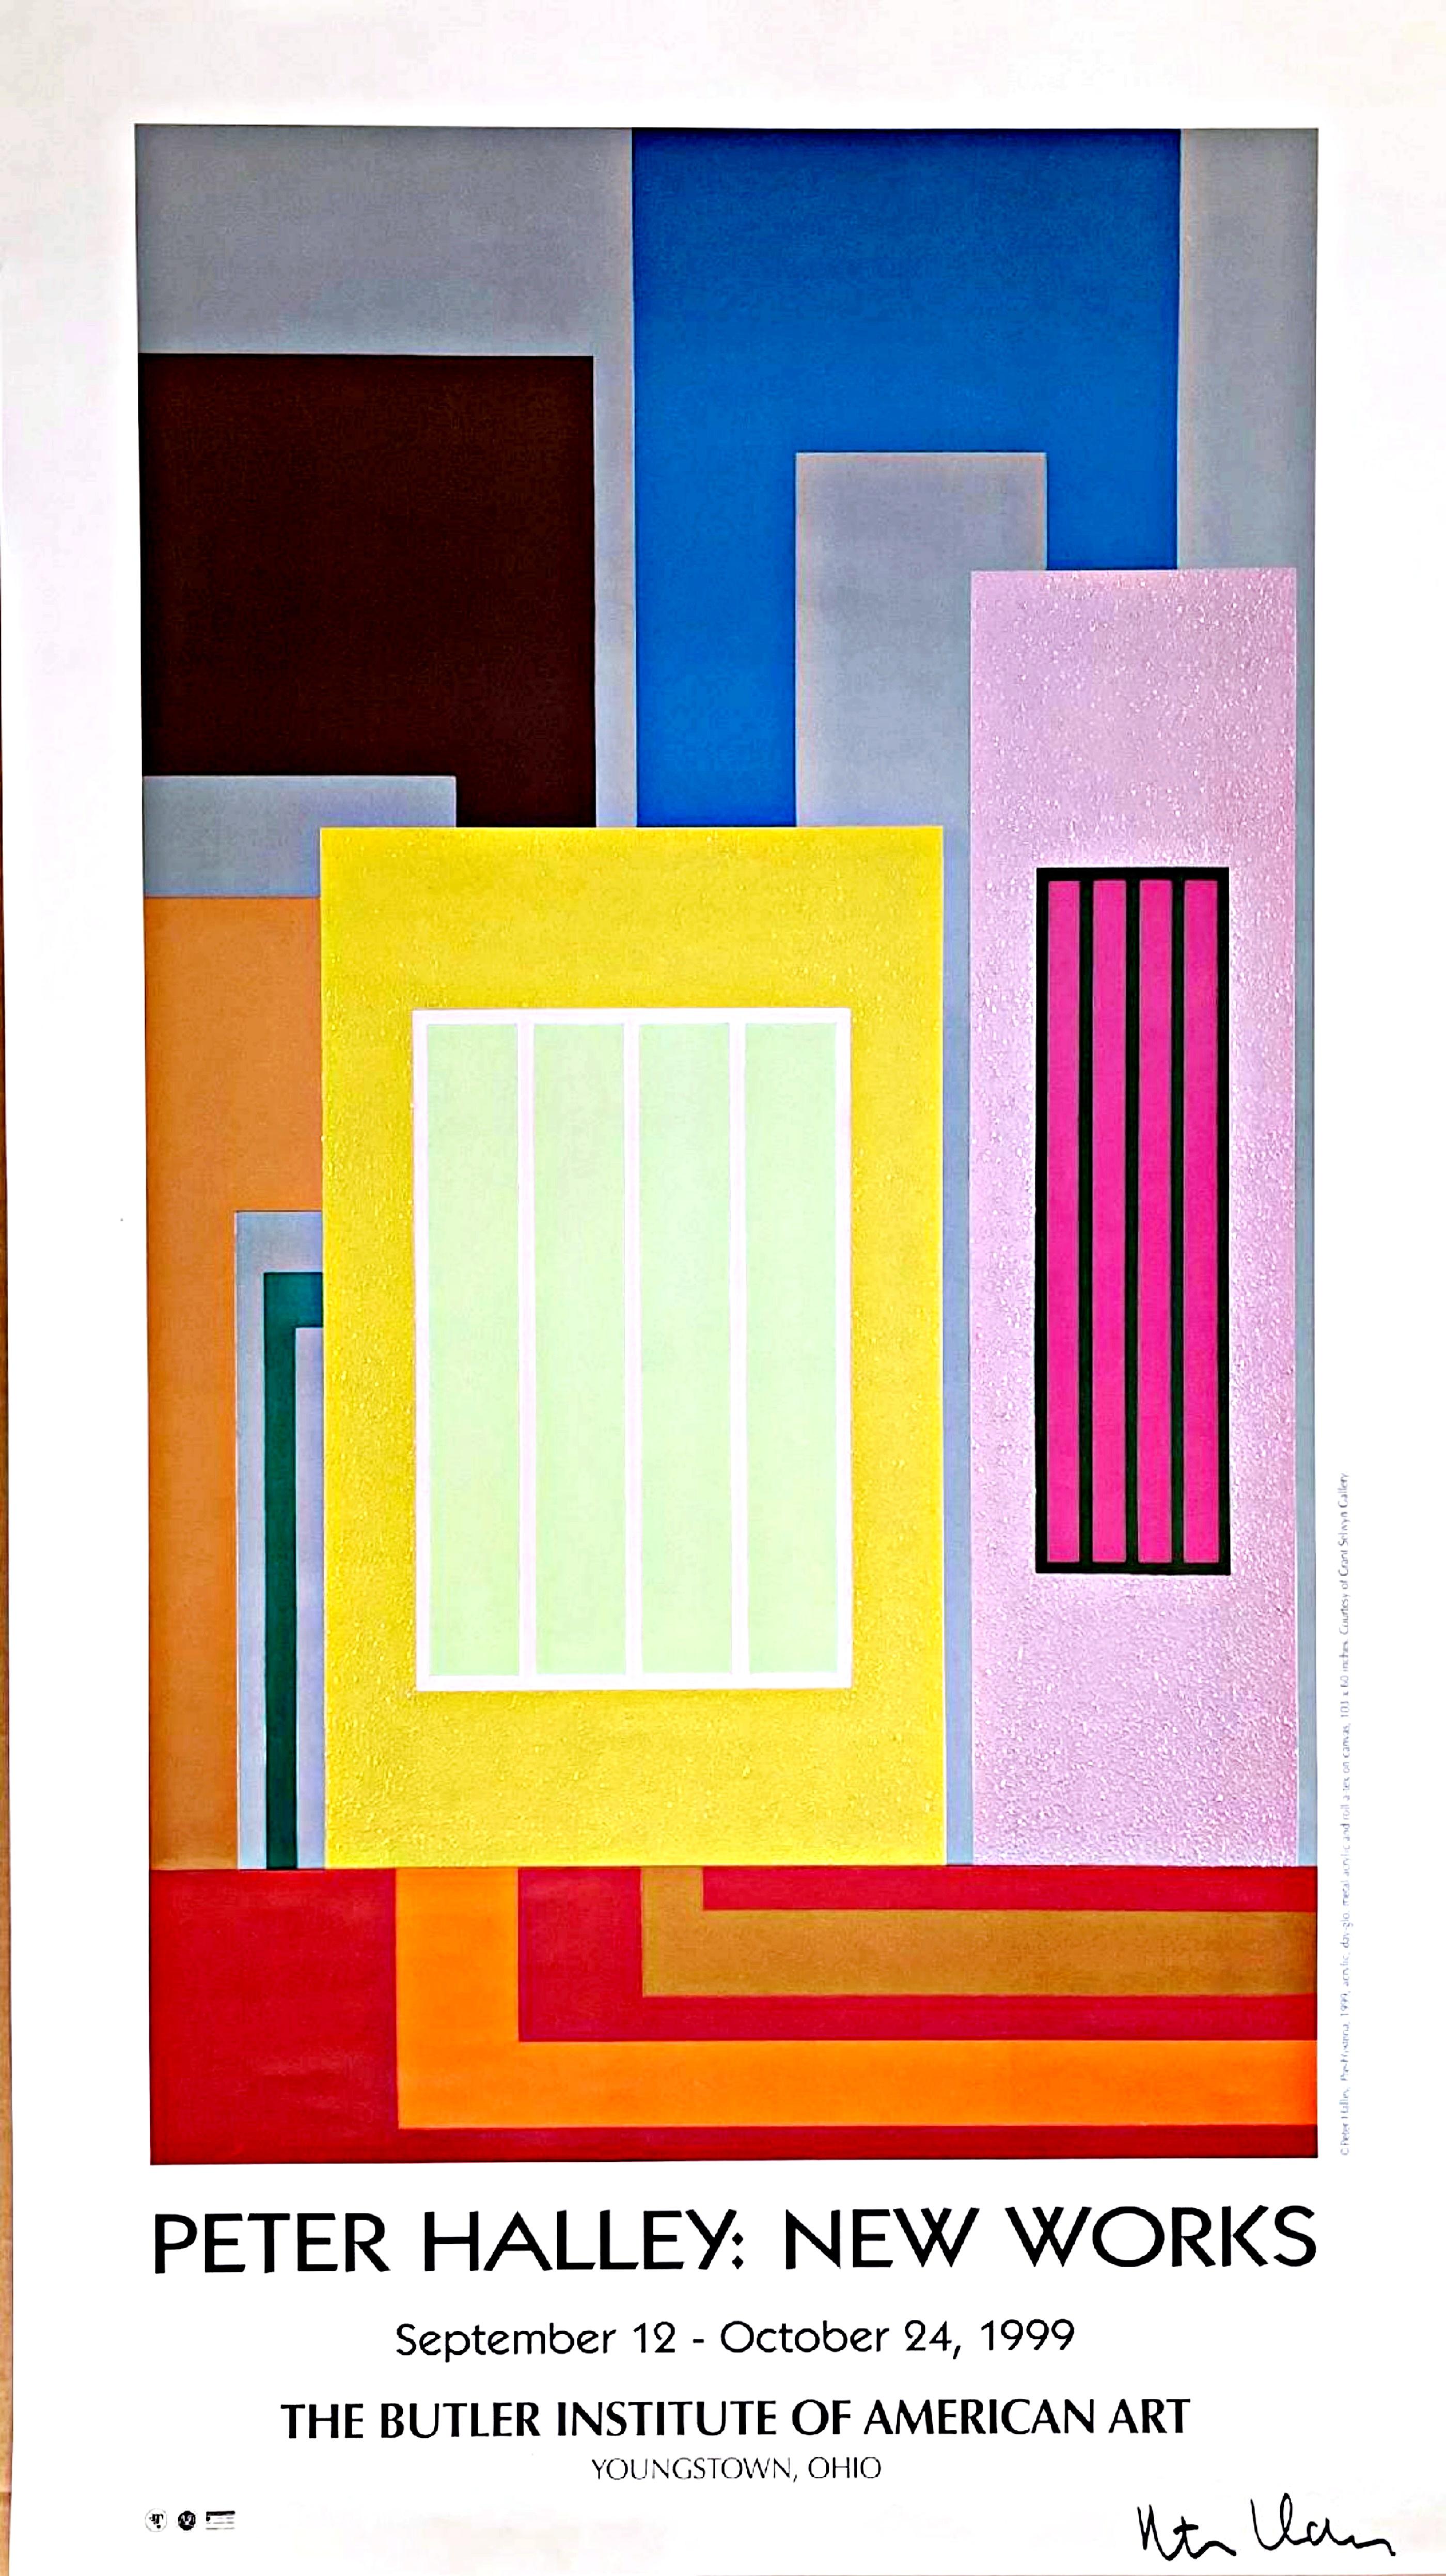 Peter Halley Abstract Print - New Works, The Butler Institute of American Art (Hand Signed)